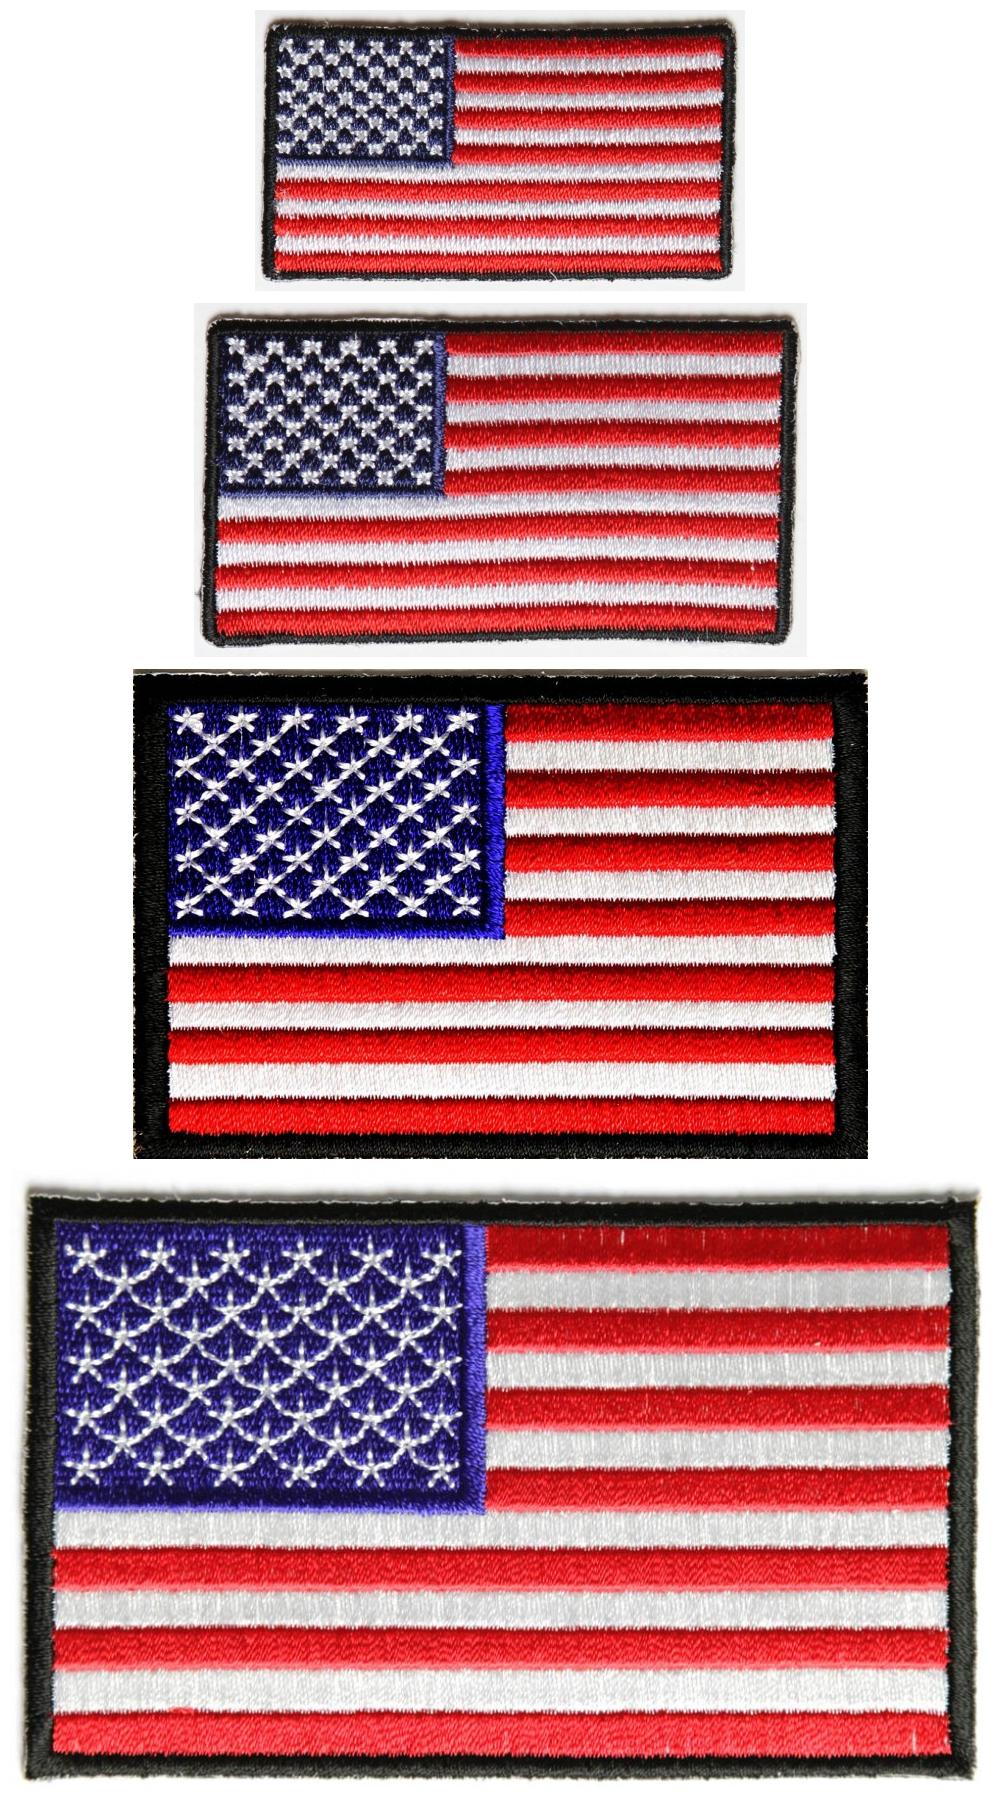 embroidered-american-flag-patches-black-borders-4-small-sizes-iron-on